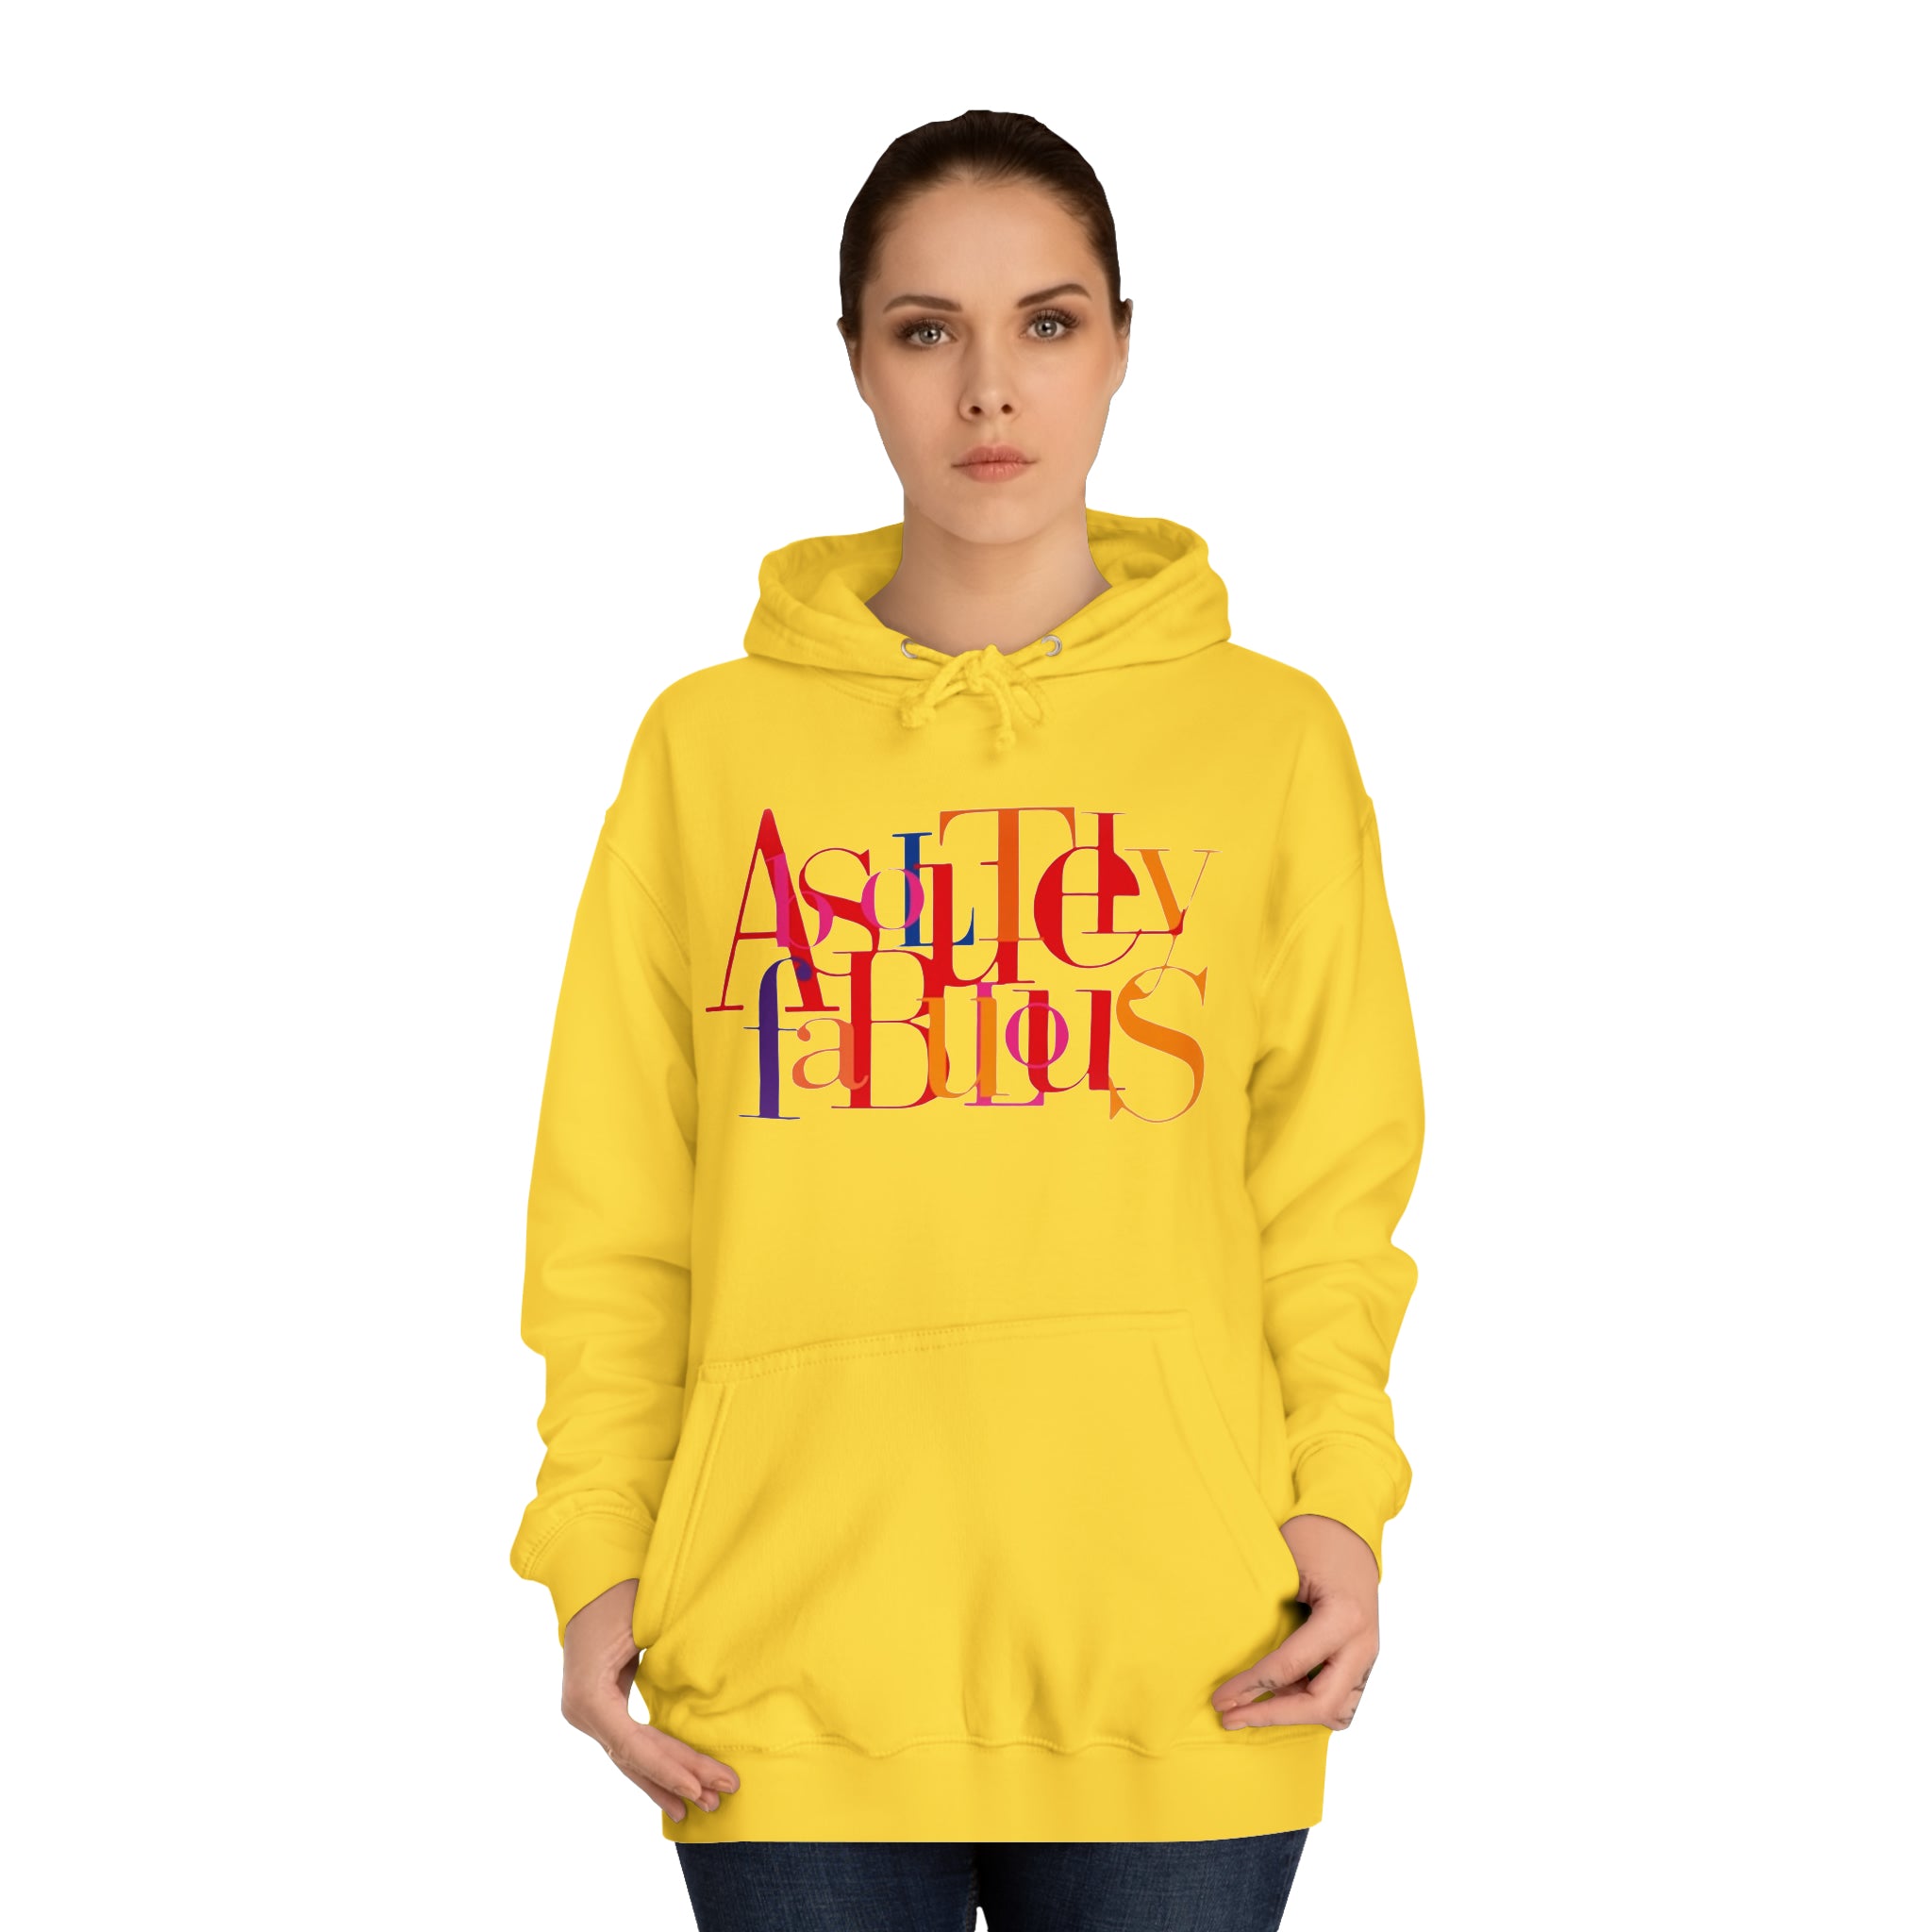 https://creationsbychrisandcarlos.store/products/absolutely-fabulous-unisex-college-hoodie